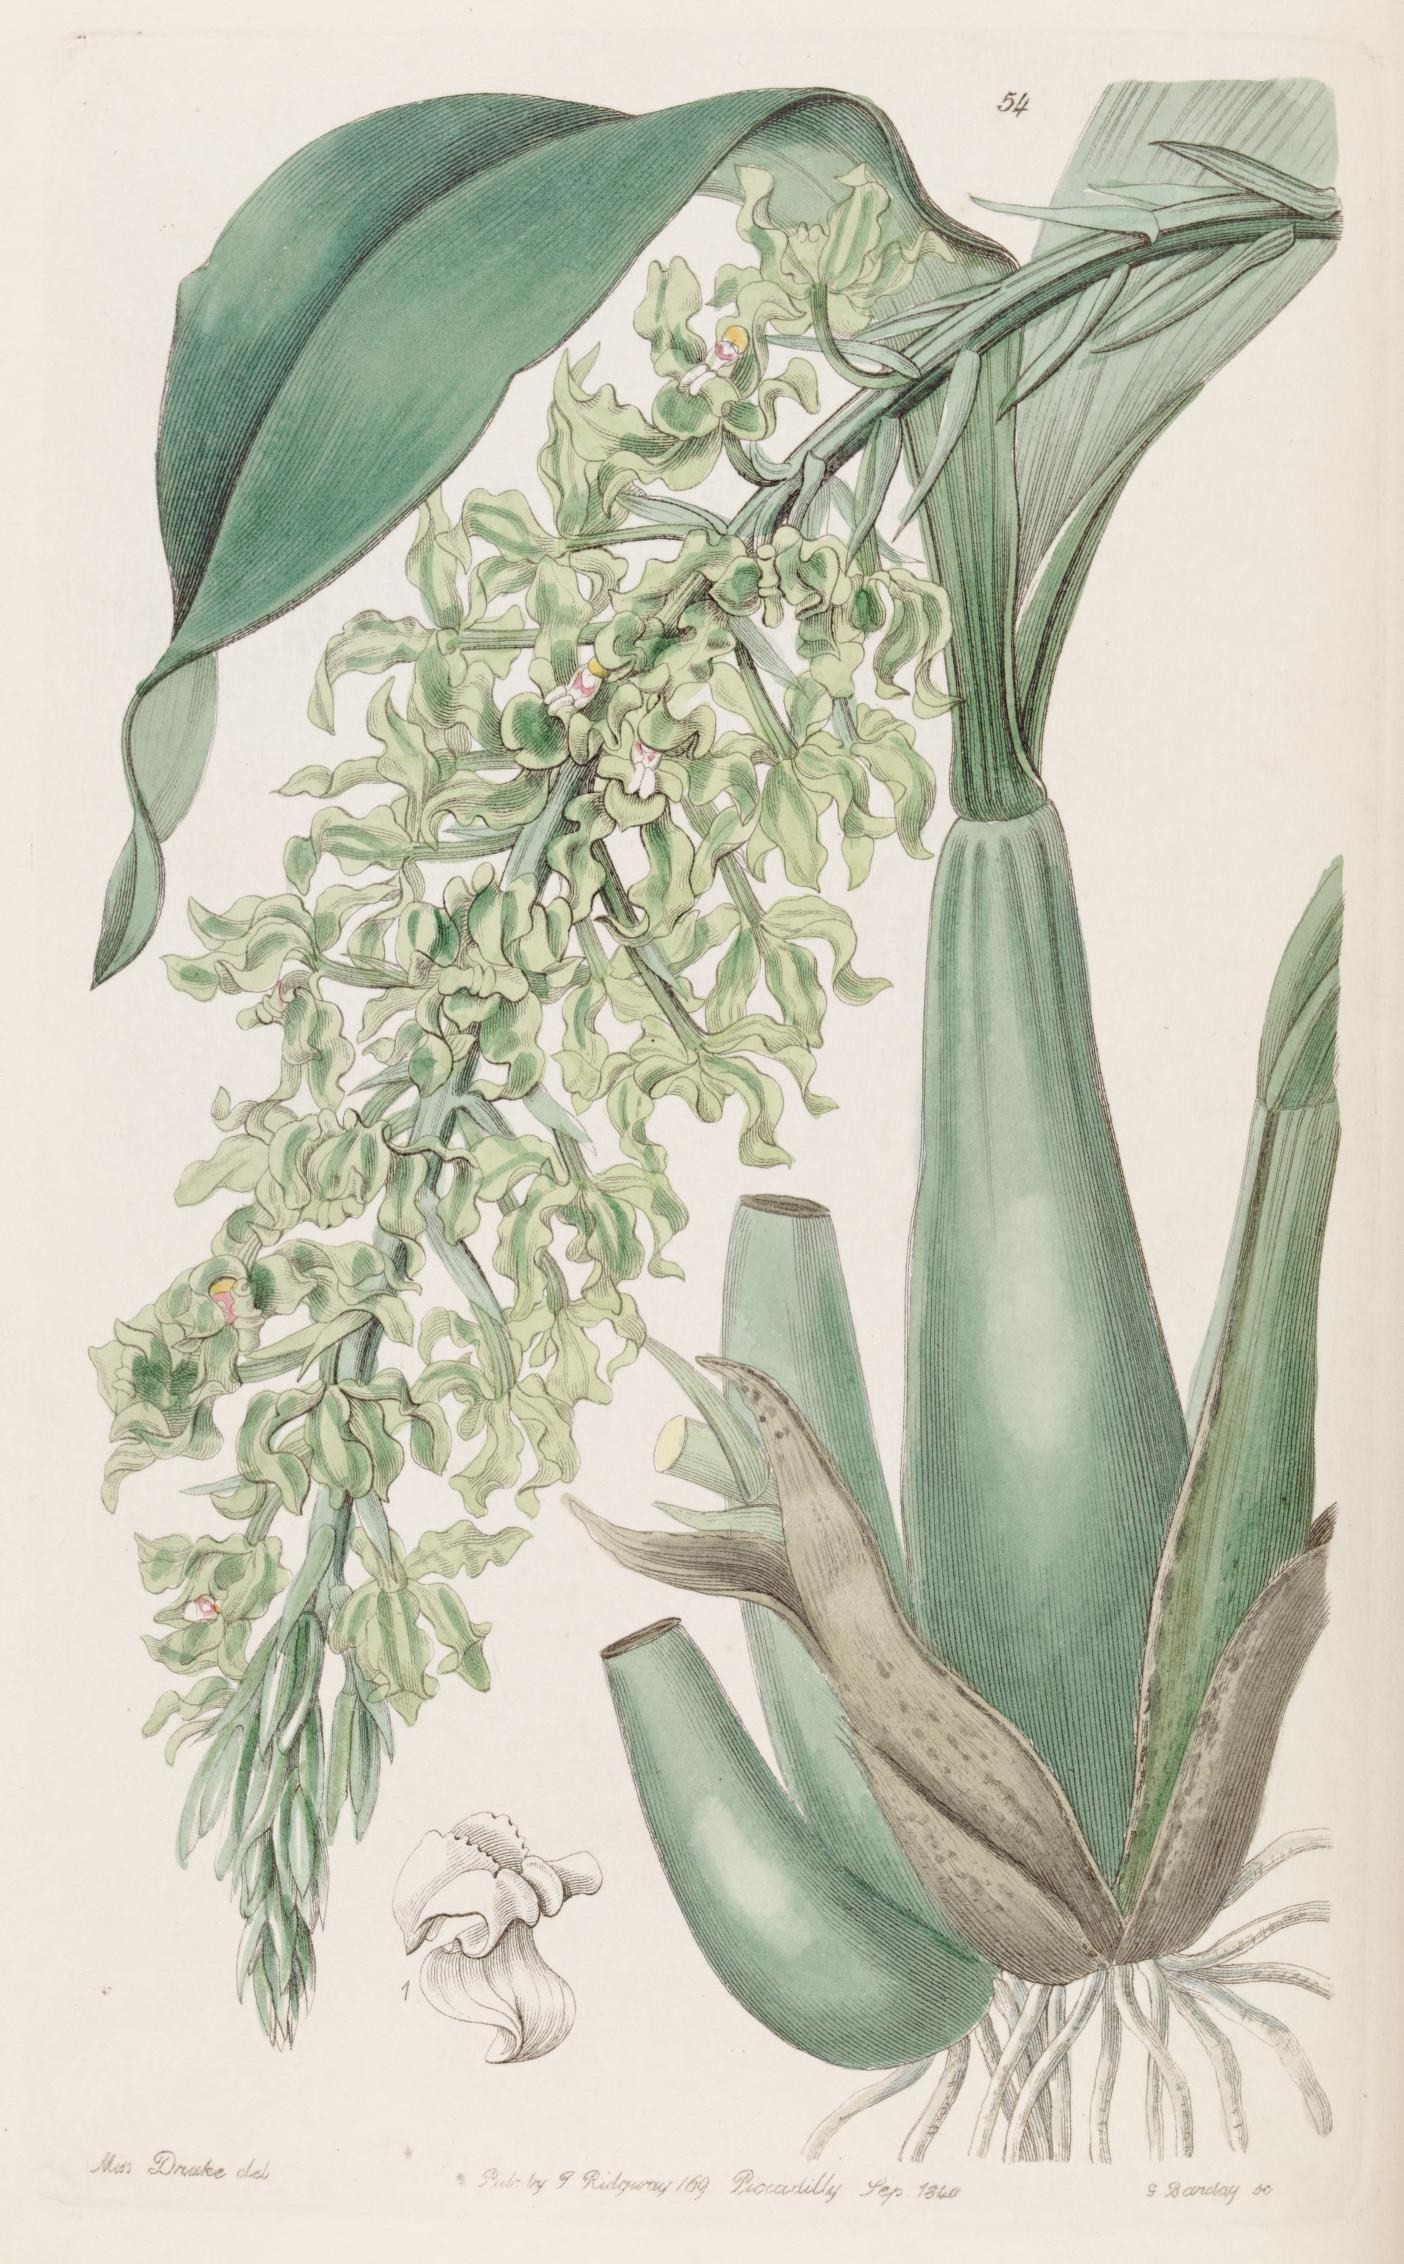 an illustration showing a botanical plant with flowers and leaves